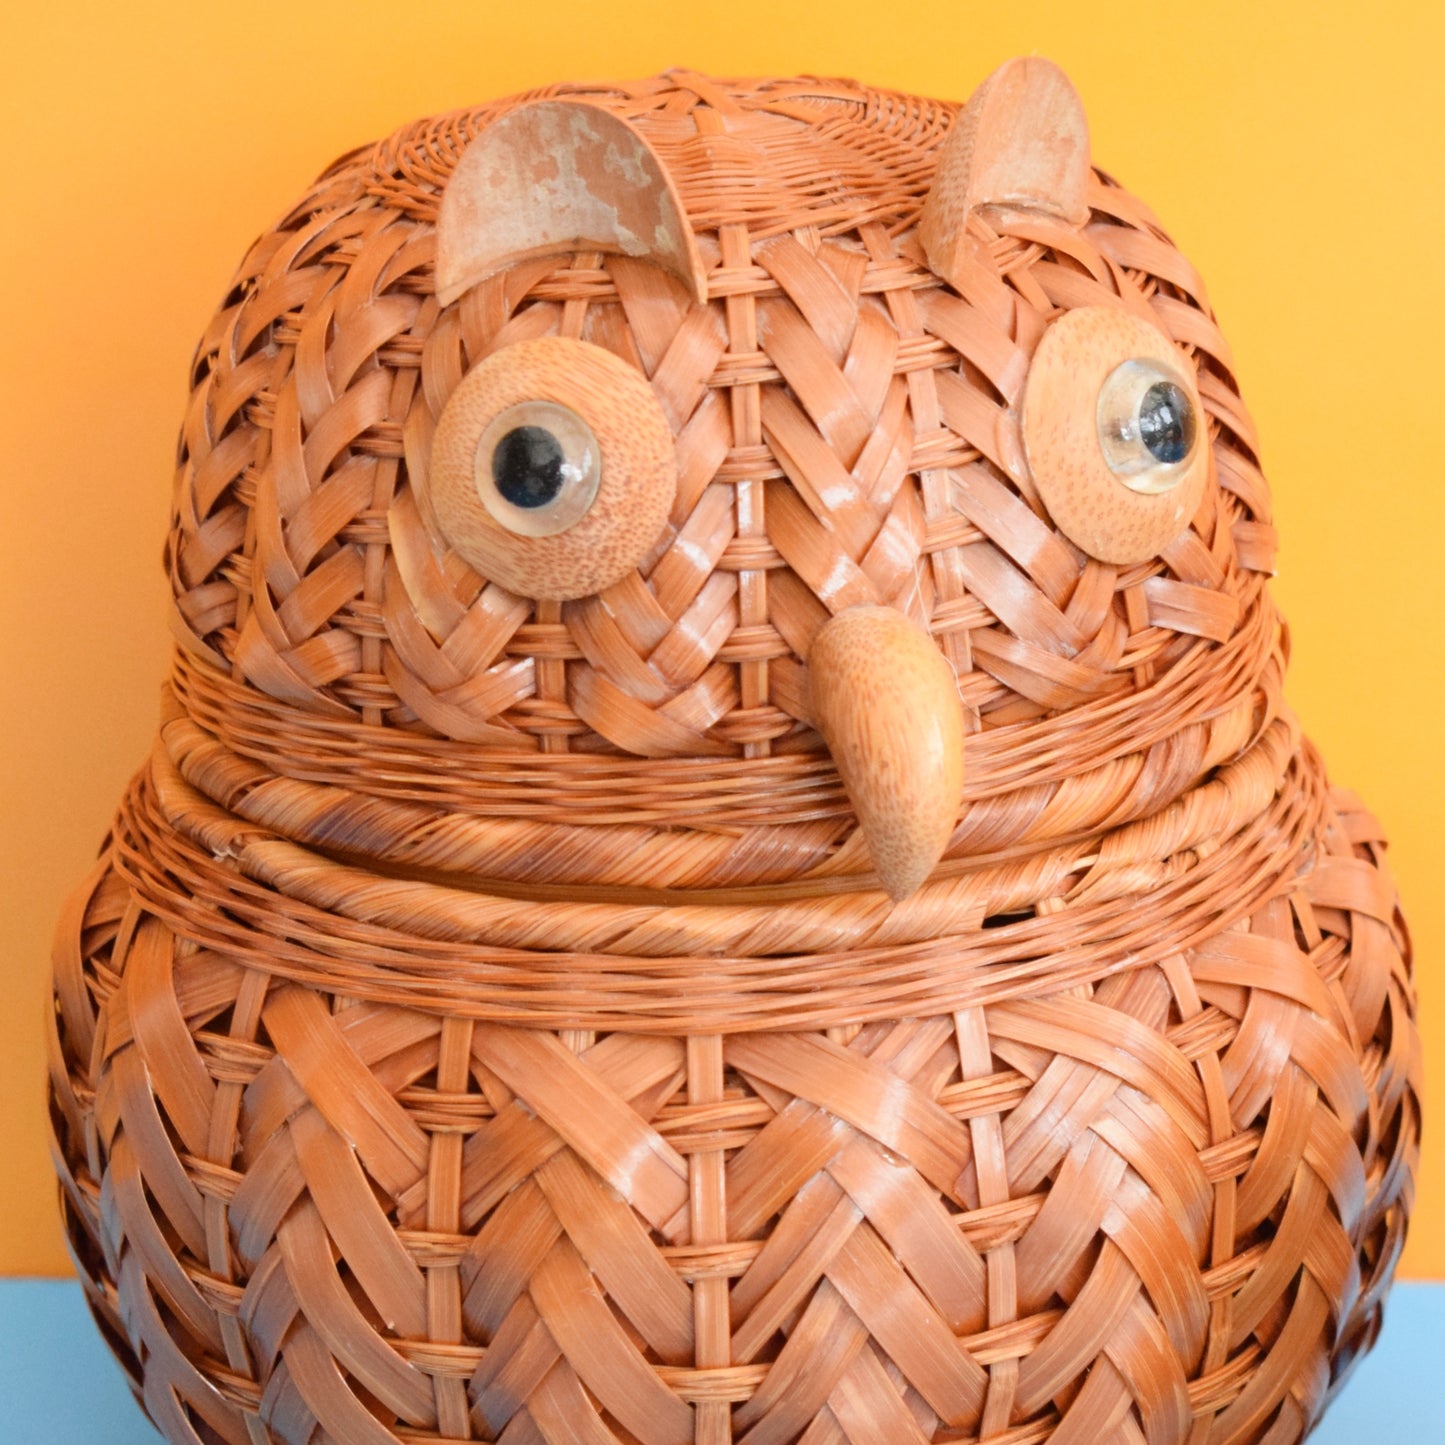 Vintage 1970s Kitsch Owl Shaped Containers